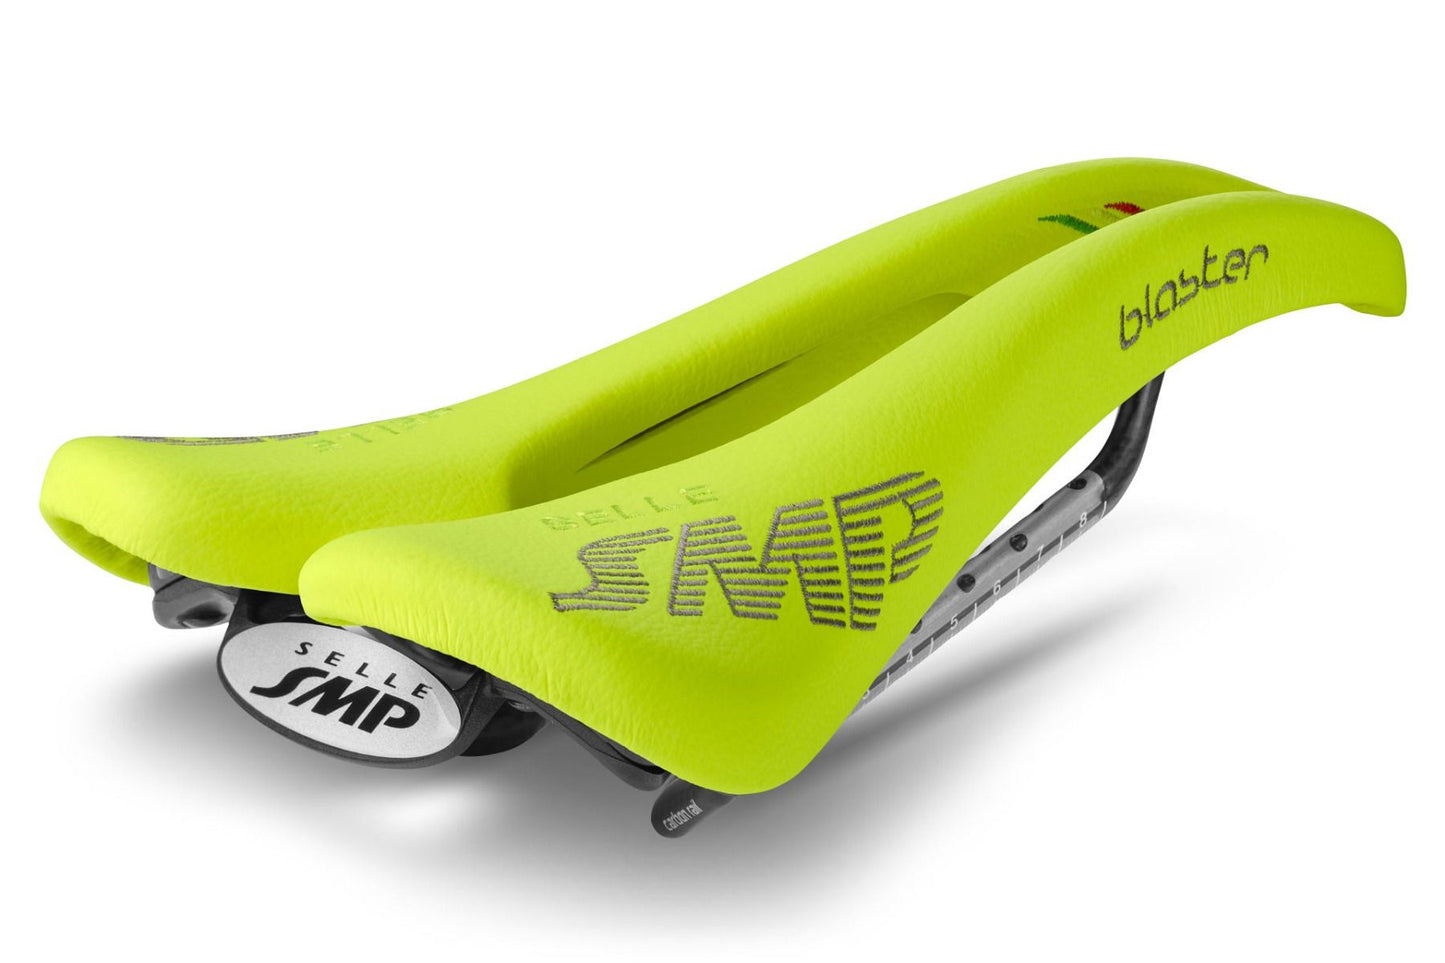 Selle SMP Blaster Saddle with Carbon Rails (Fluro Yellow)